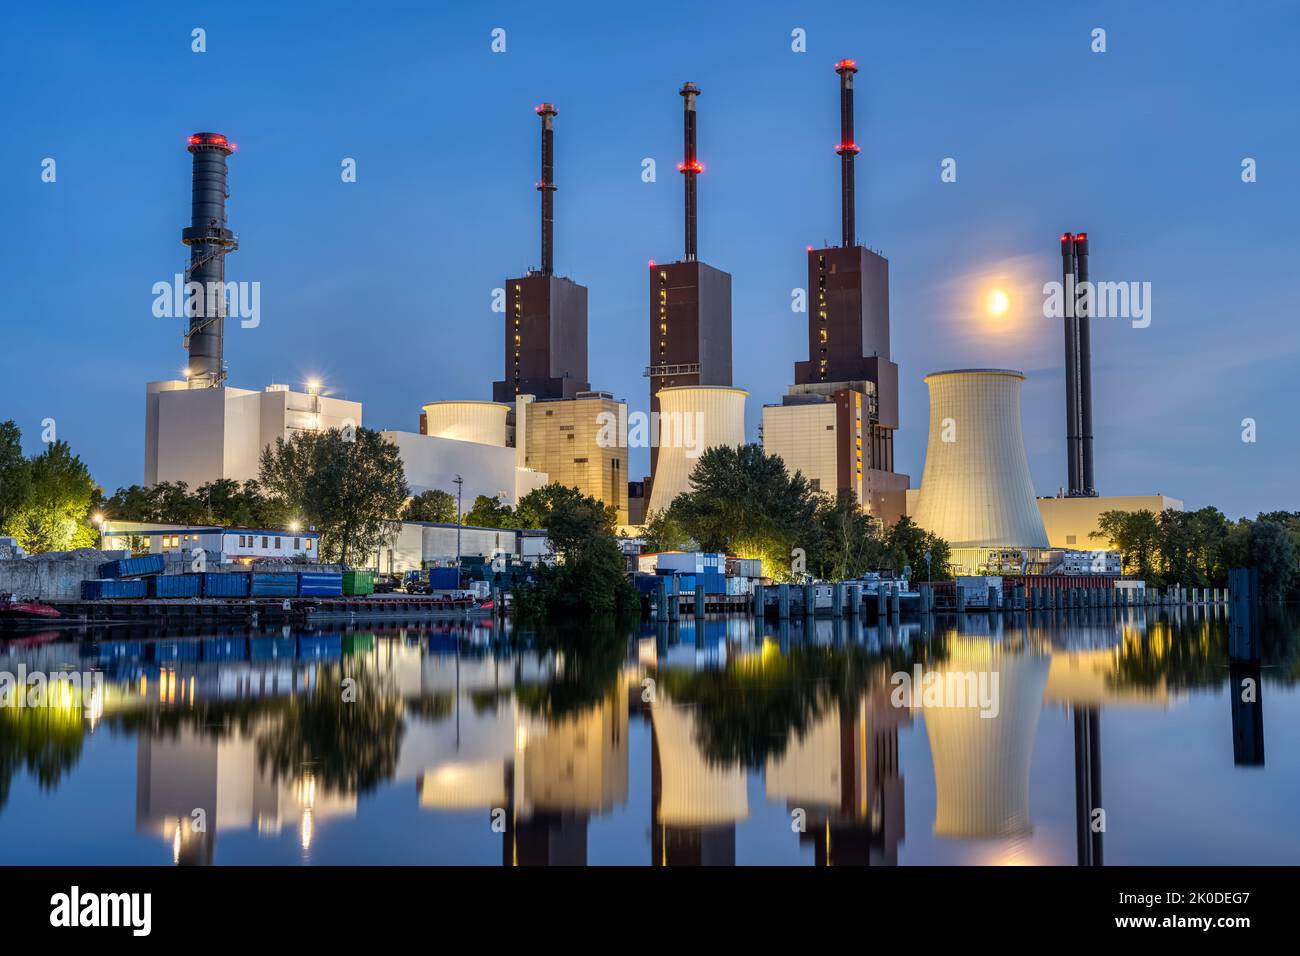 A thermal power station in Berlin at night reflected in a canal Stock Photo